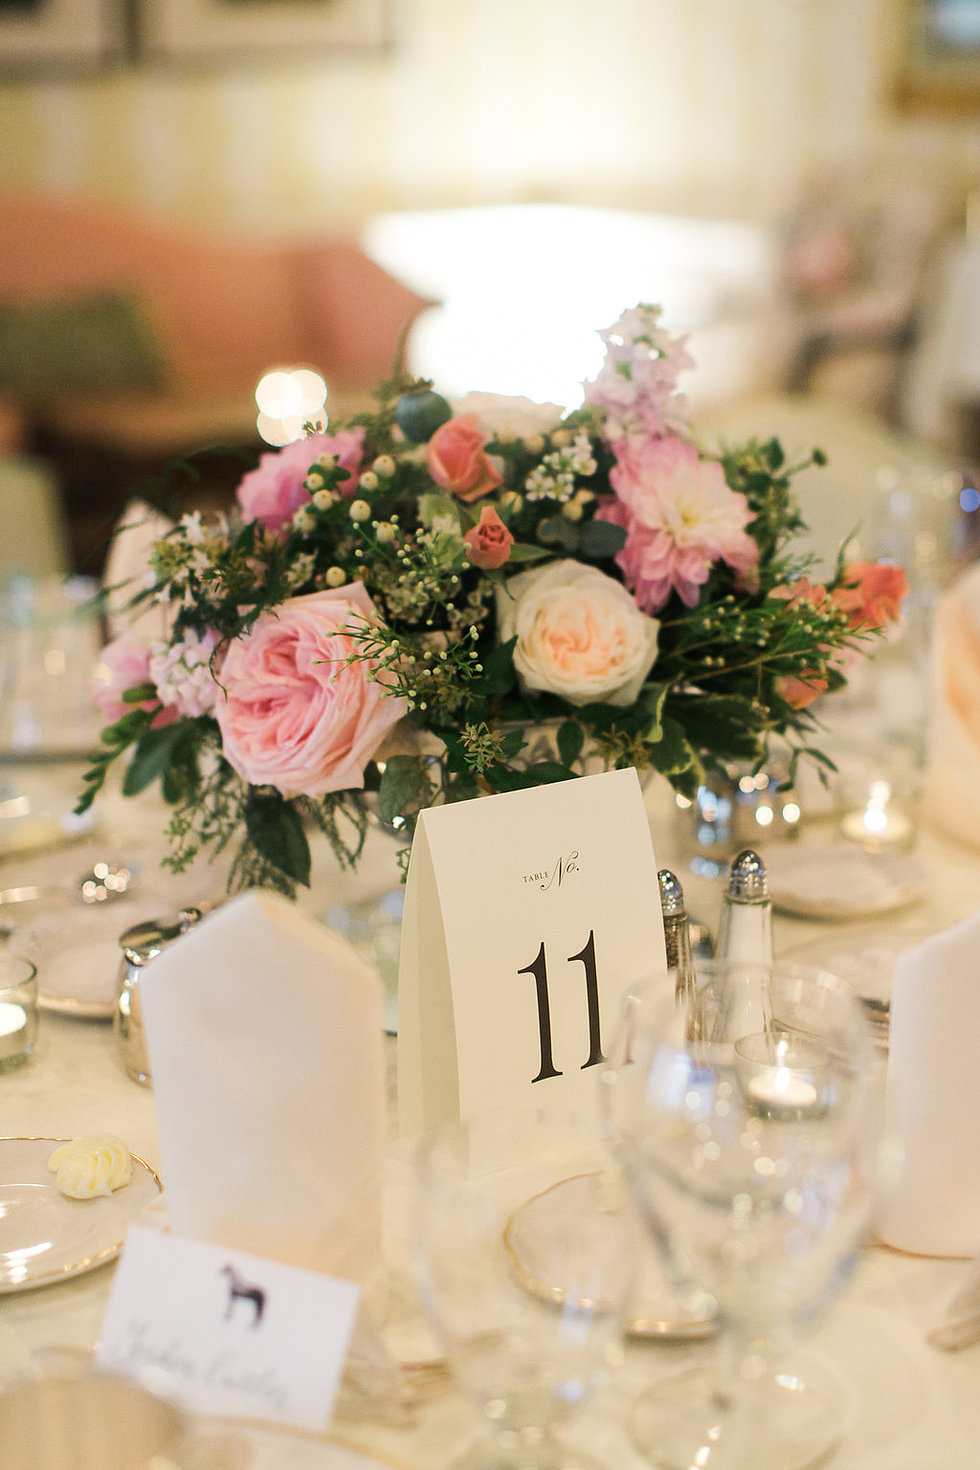 floral arrangement at a table setting